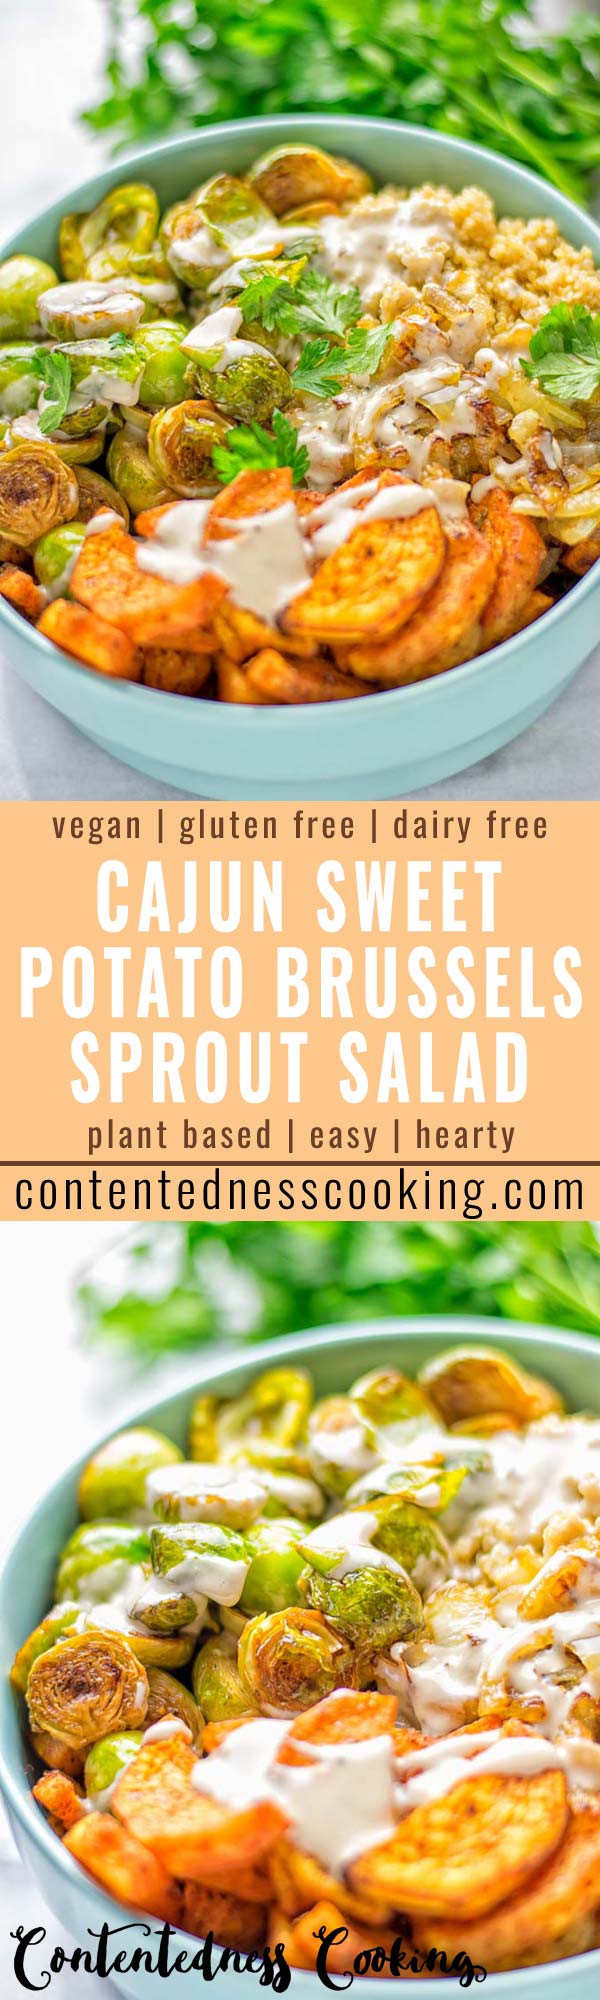 This Cajun Sweet Potato Brussels Sprout Salad is naturally vegan, gluten free and super easy to make. It’s so delicious for lunch, dinner, meal prep, work lunch, holidays and Christmas. Try it now, make this keeper again and again. #vegan #glutenfree #dairyfree #vegetarian #contentednesscooking #mealprep #worklunchideas #dinner #lunch #brusselsproutsalad #cajunsweetpotatoes #holidayfood #christmasrecipes #roastedbrusselssprouts #christmasfood #holidayrecipes 